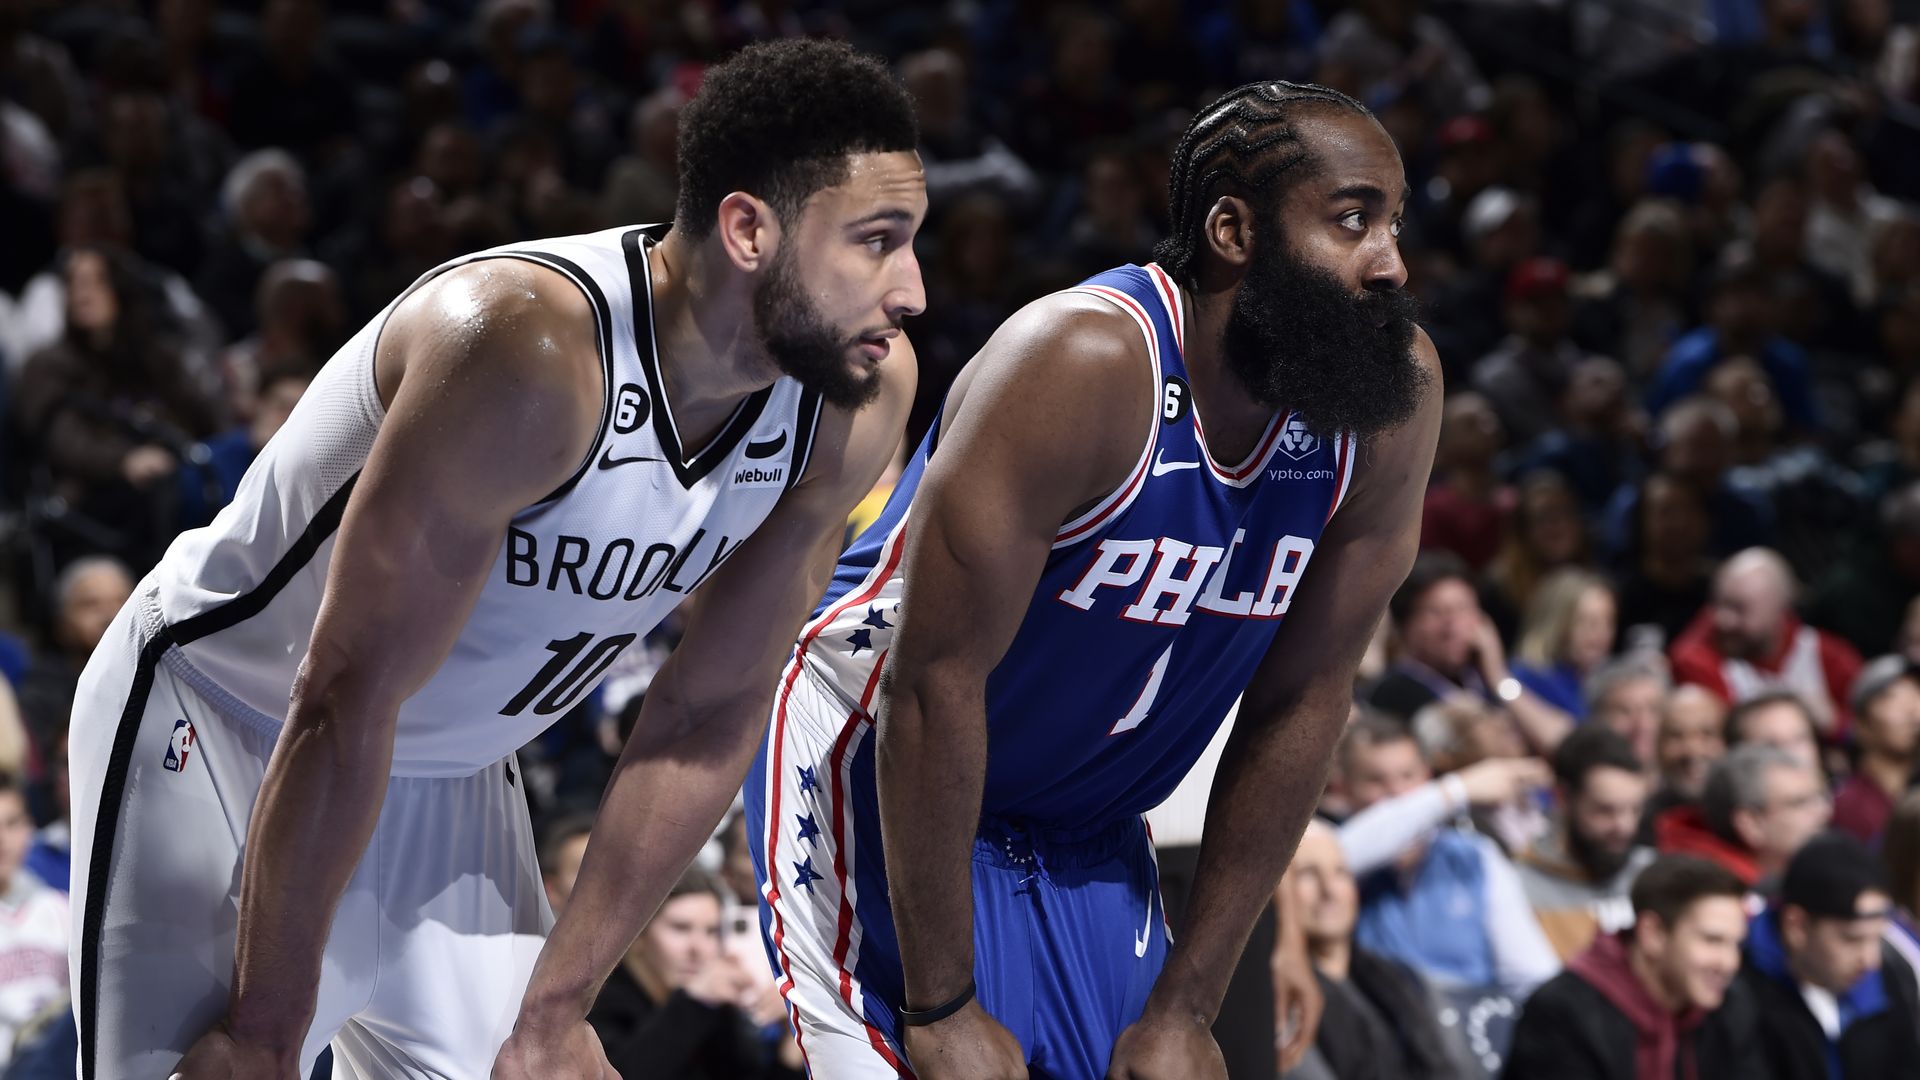 Ben Simmons (left) and James Harden watch the ball on the court while holding their hands on their knees.